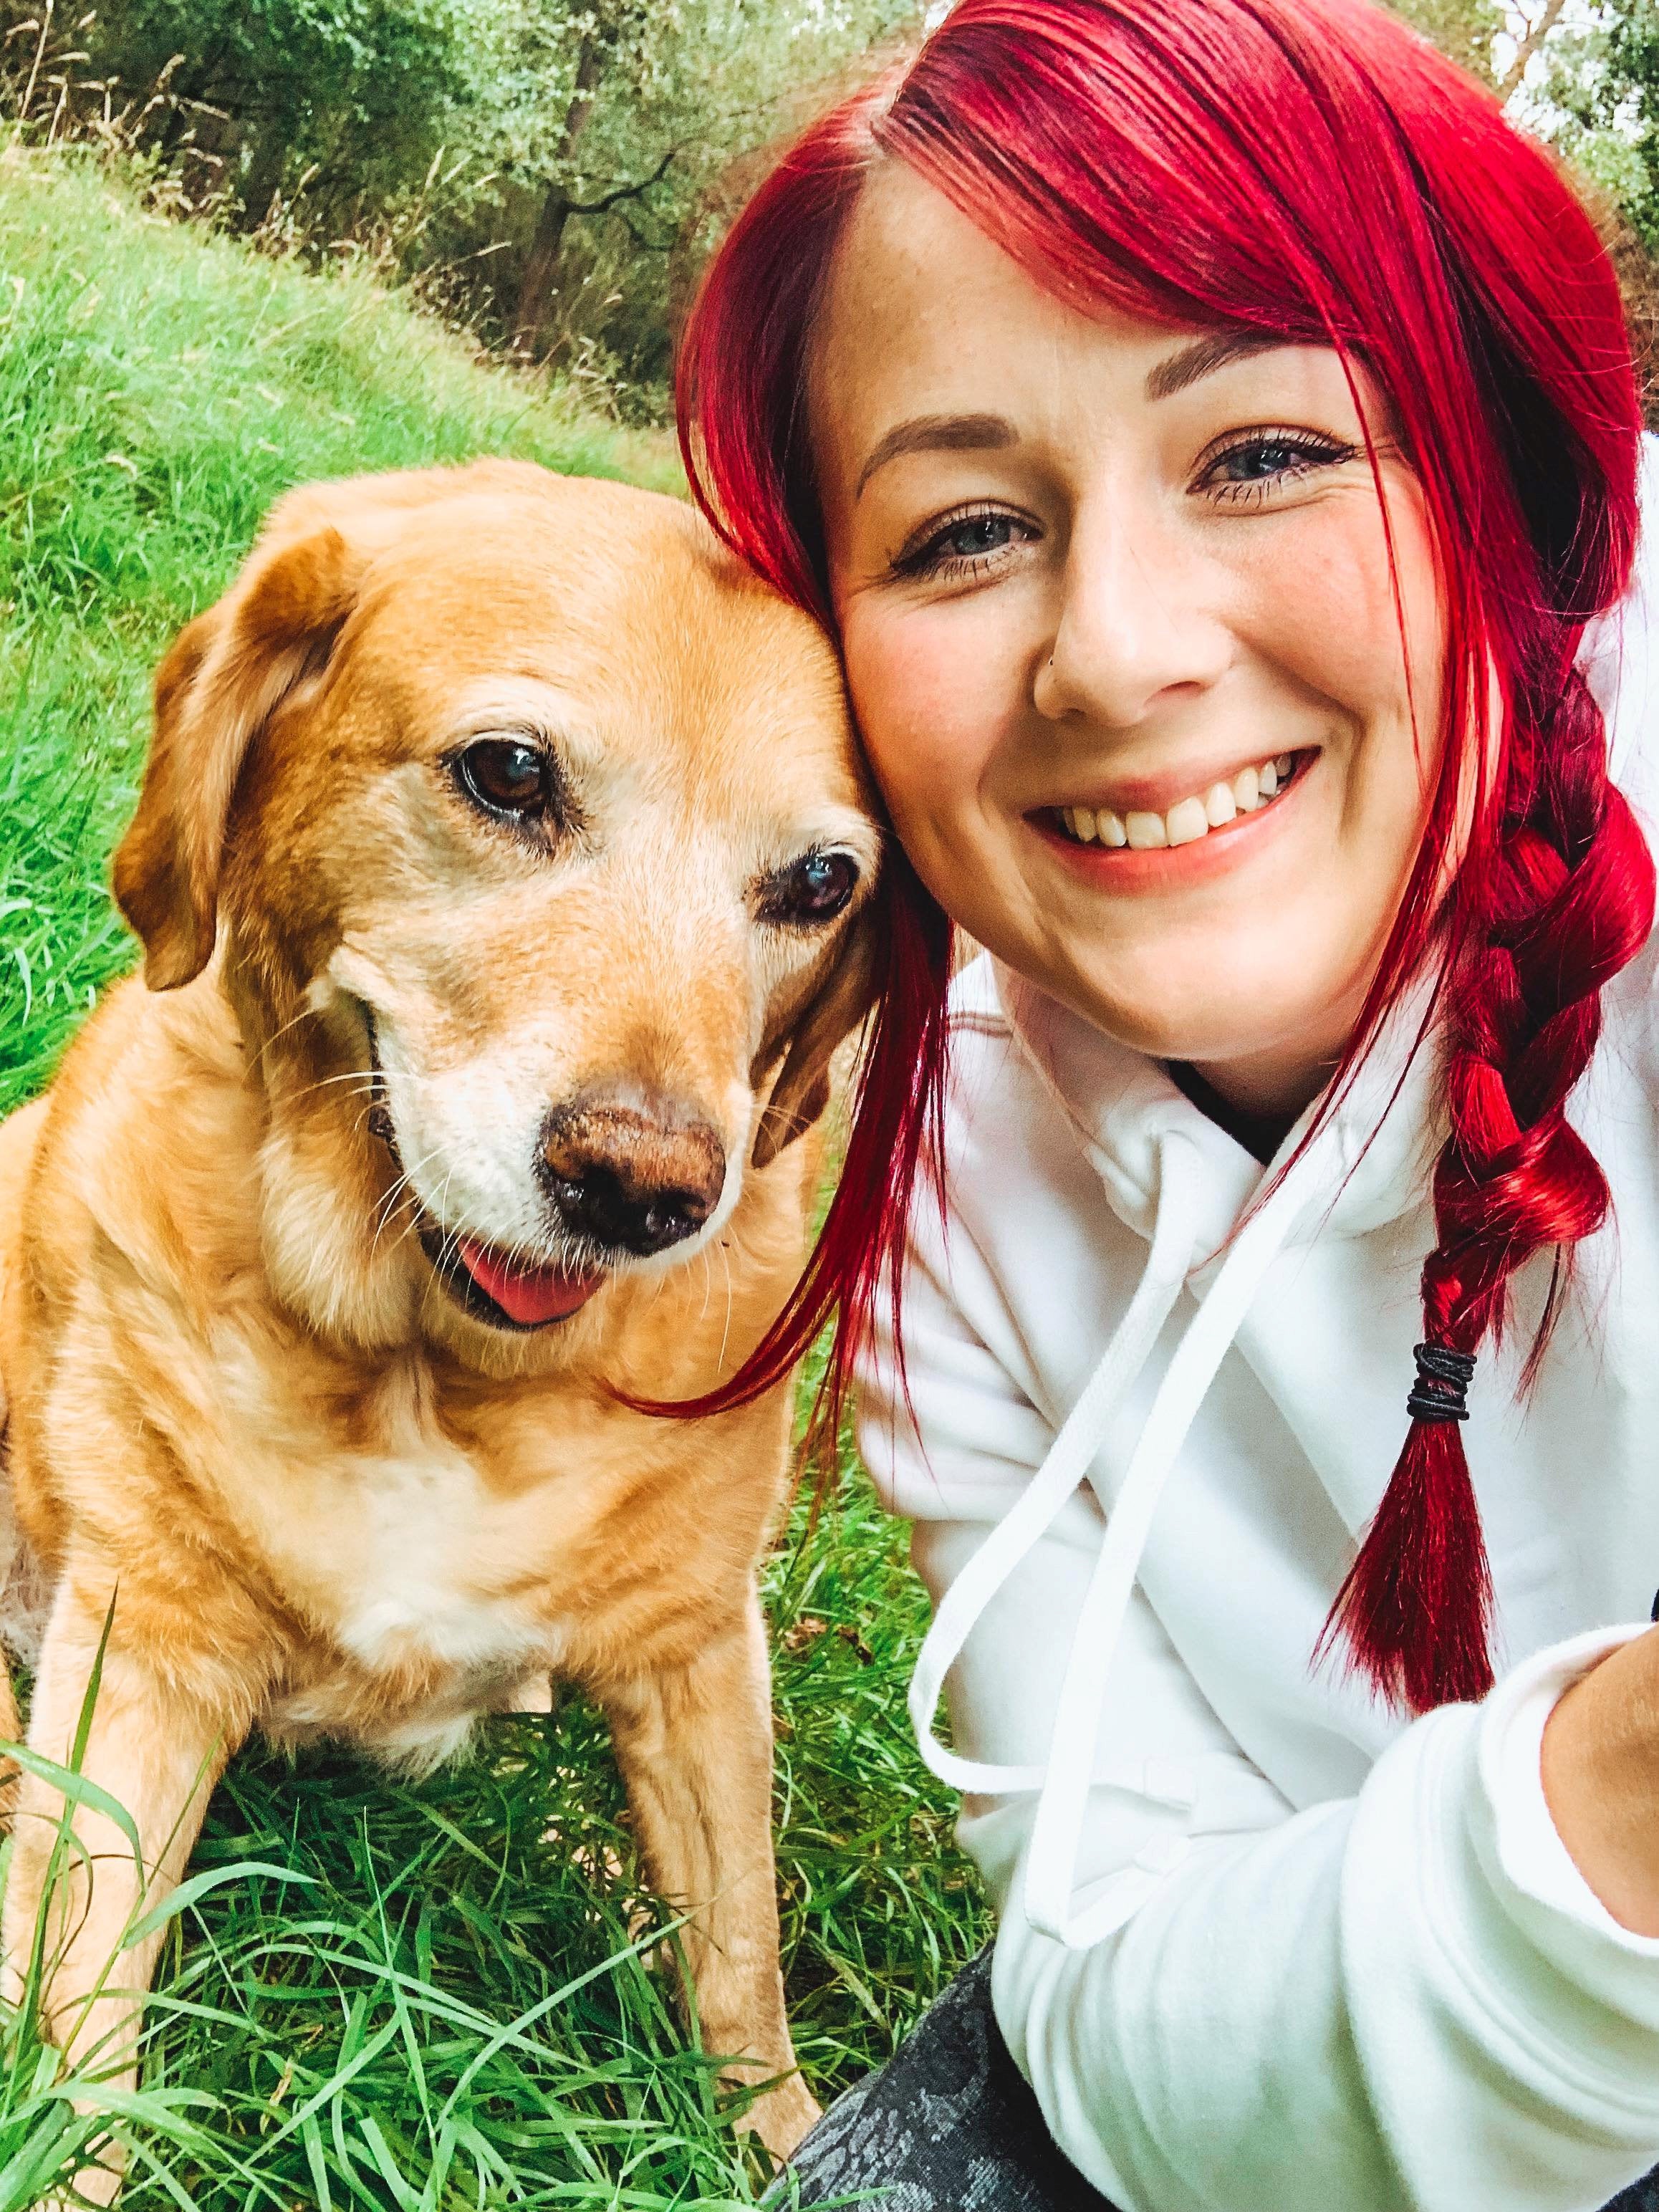 Megan Marshall quit her job to spend time with her terminally-ill dog